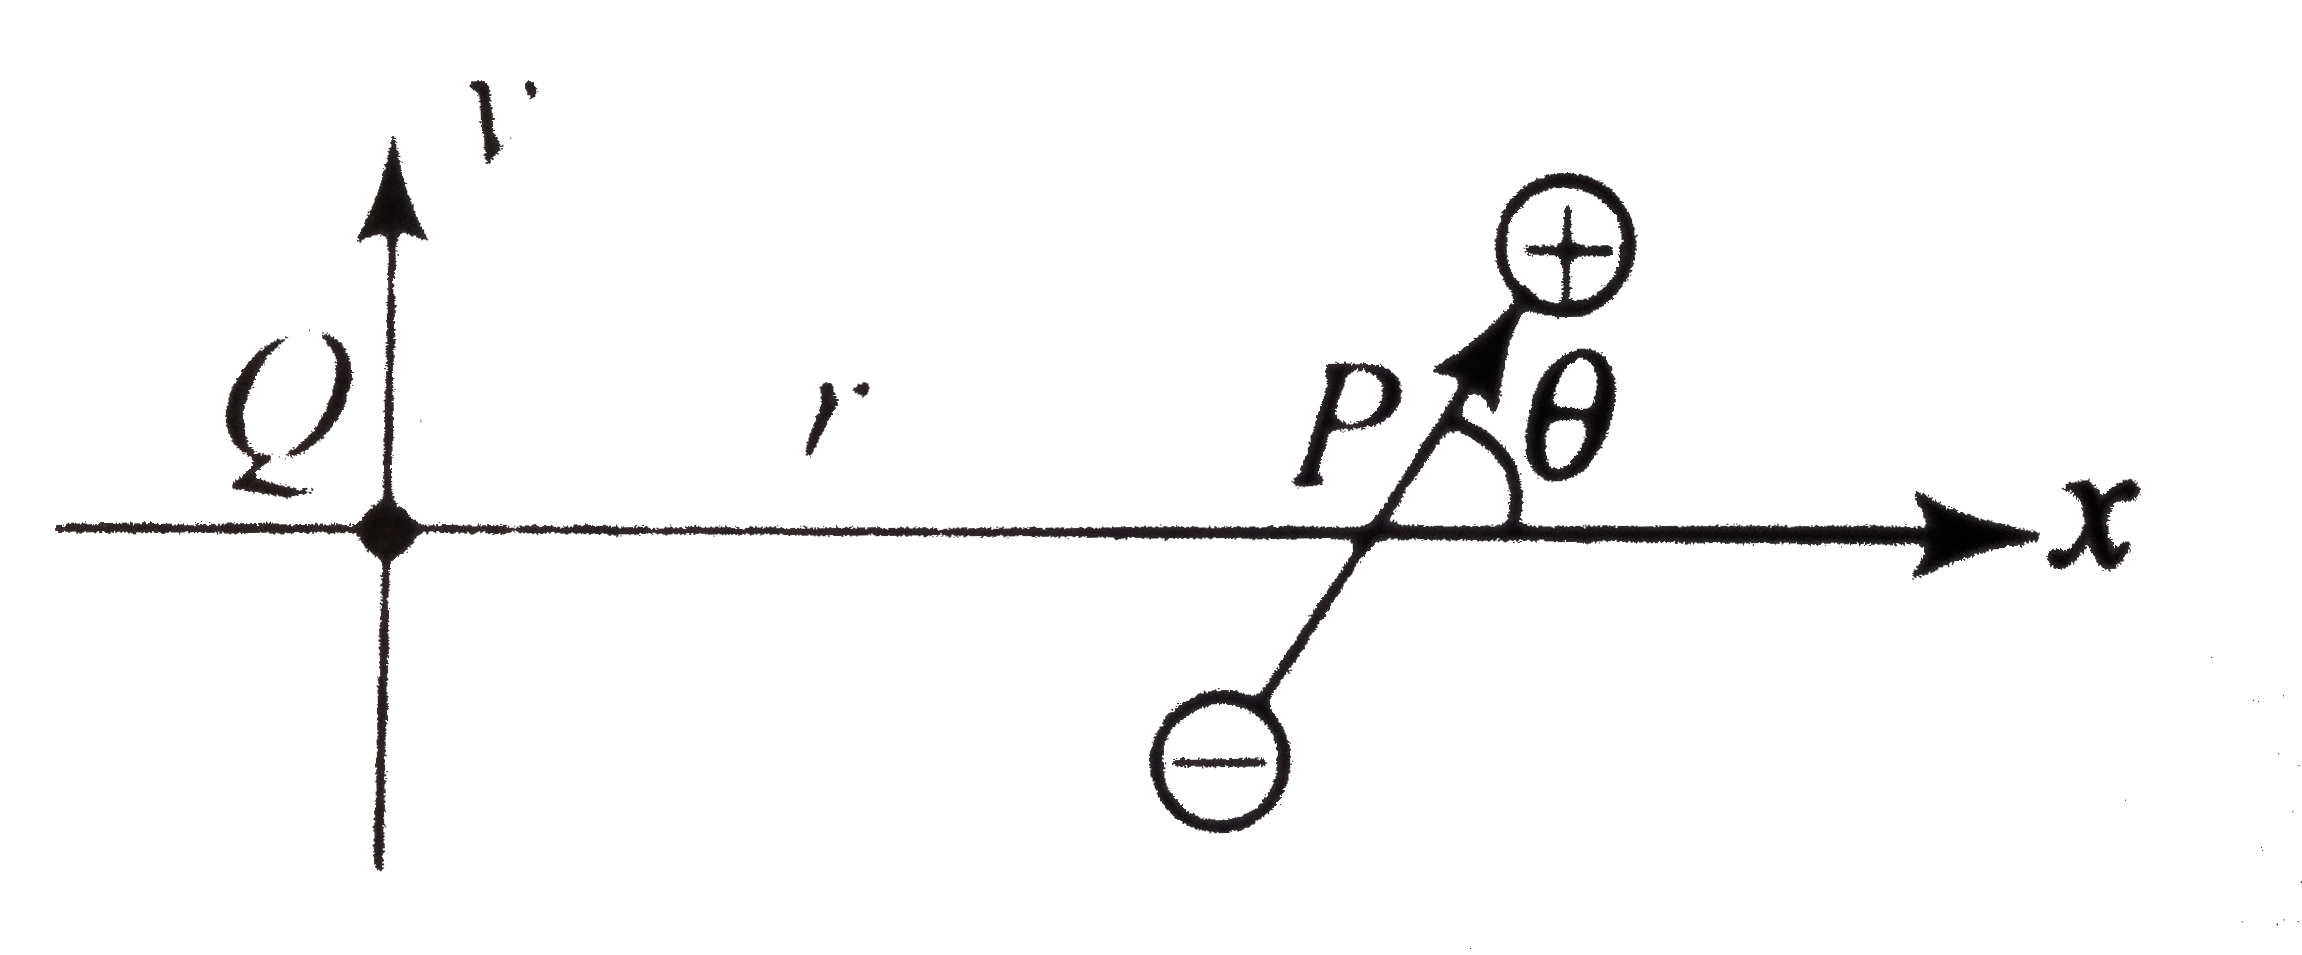 A point negative charge -Q is placed at a distance r from a dipole with dipole moment P in the xy plane as shown in fig. The x-component of force acting on the charge-Q is